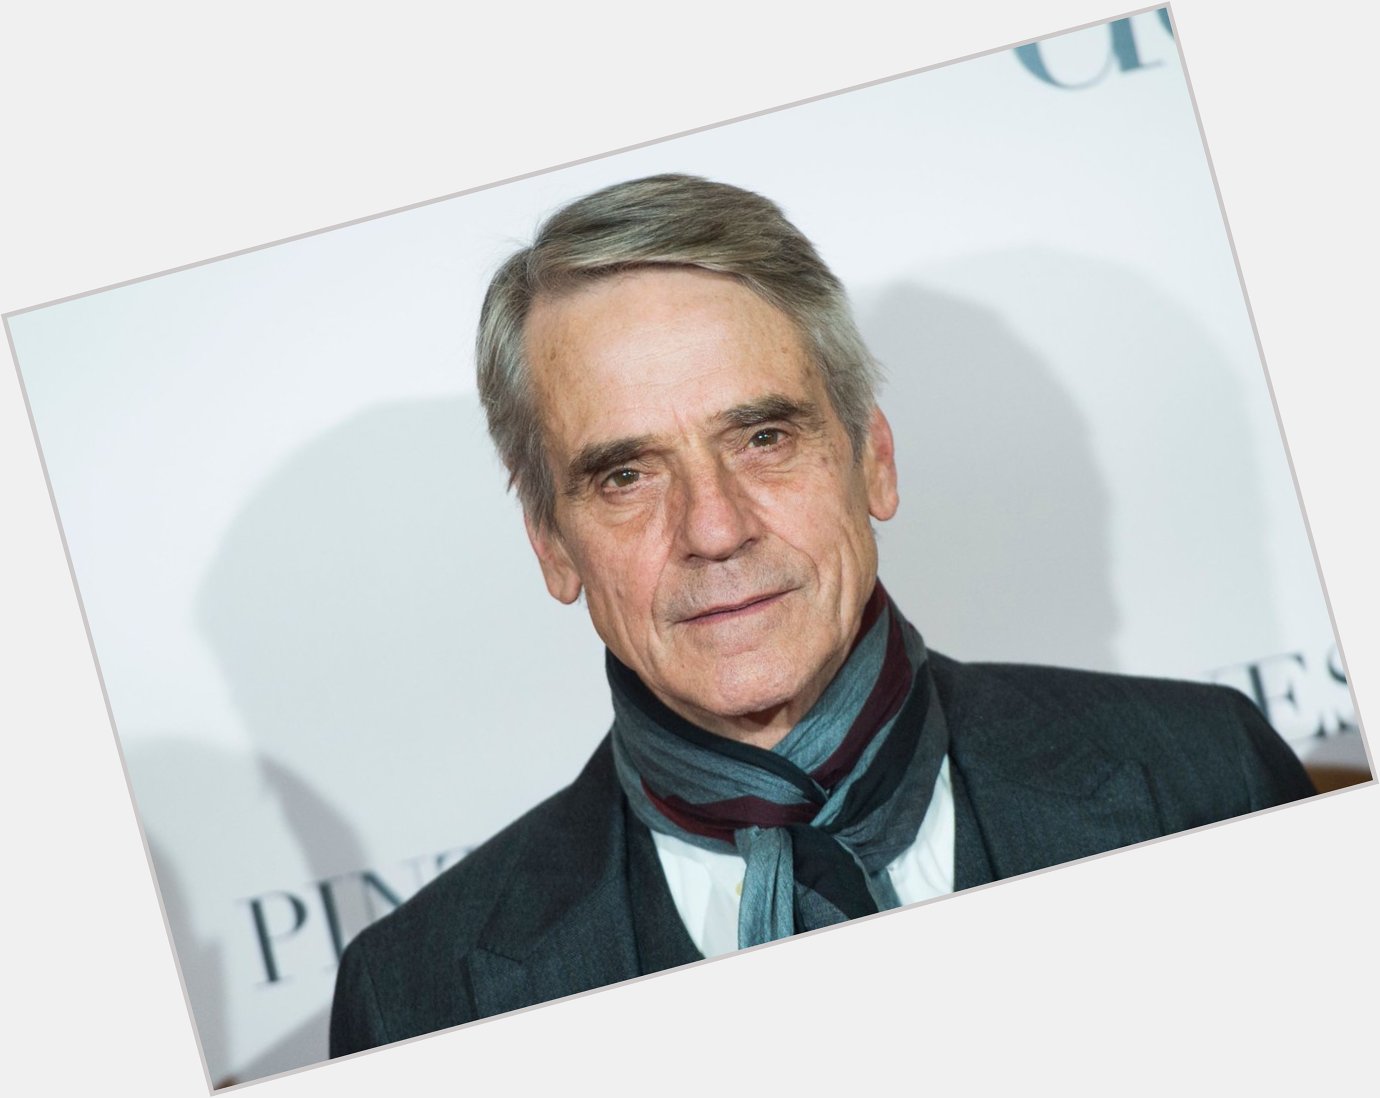  Happy Birthday Jeremy Irons !
The British actor was born on 19 September 1948. 